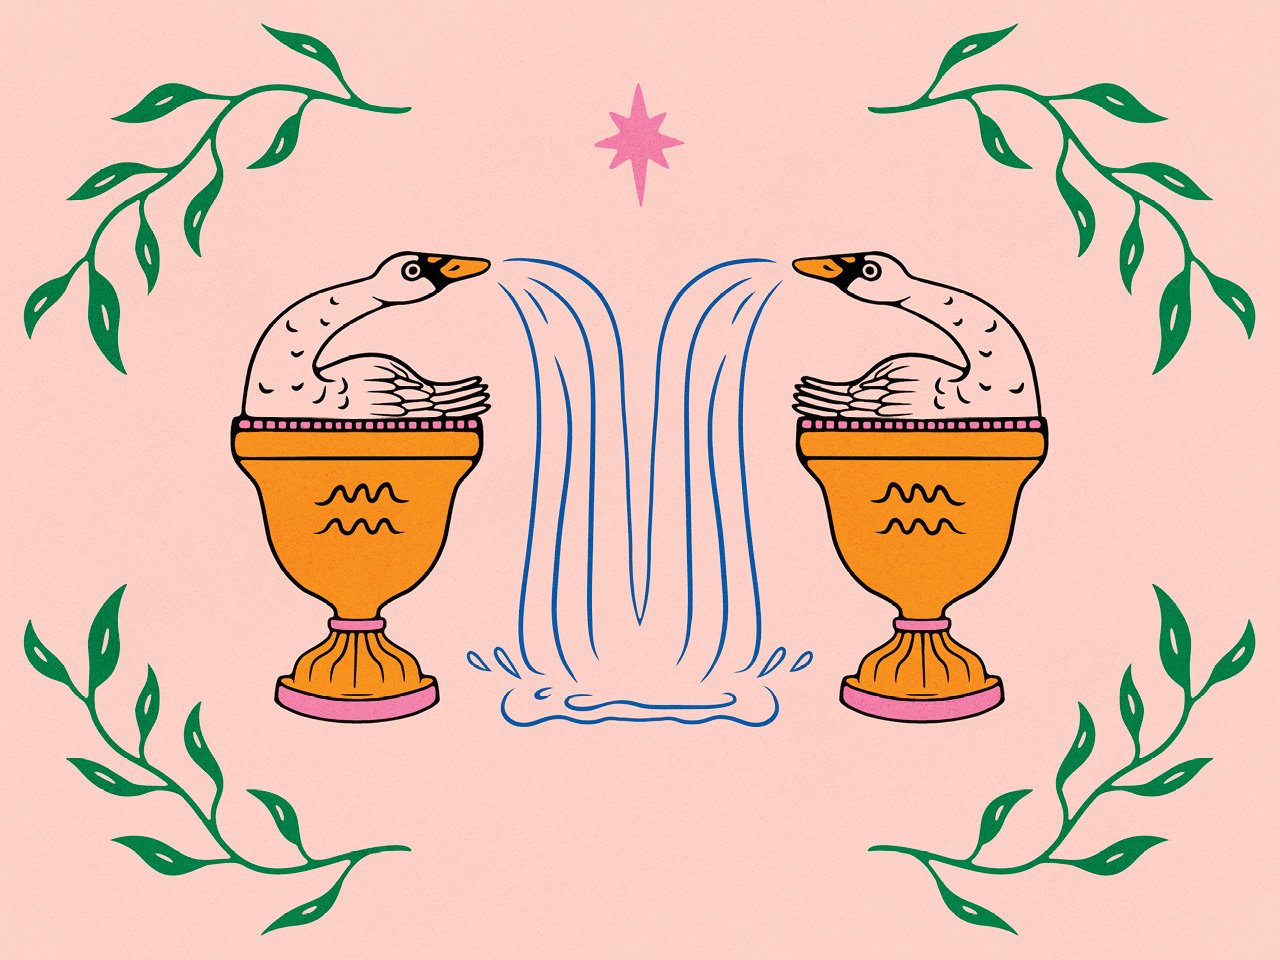 An illustration of two swans sitting in two large vases that have the Aquarius symbol on them. The swans have water falling out of their beaks.